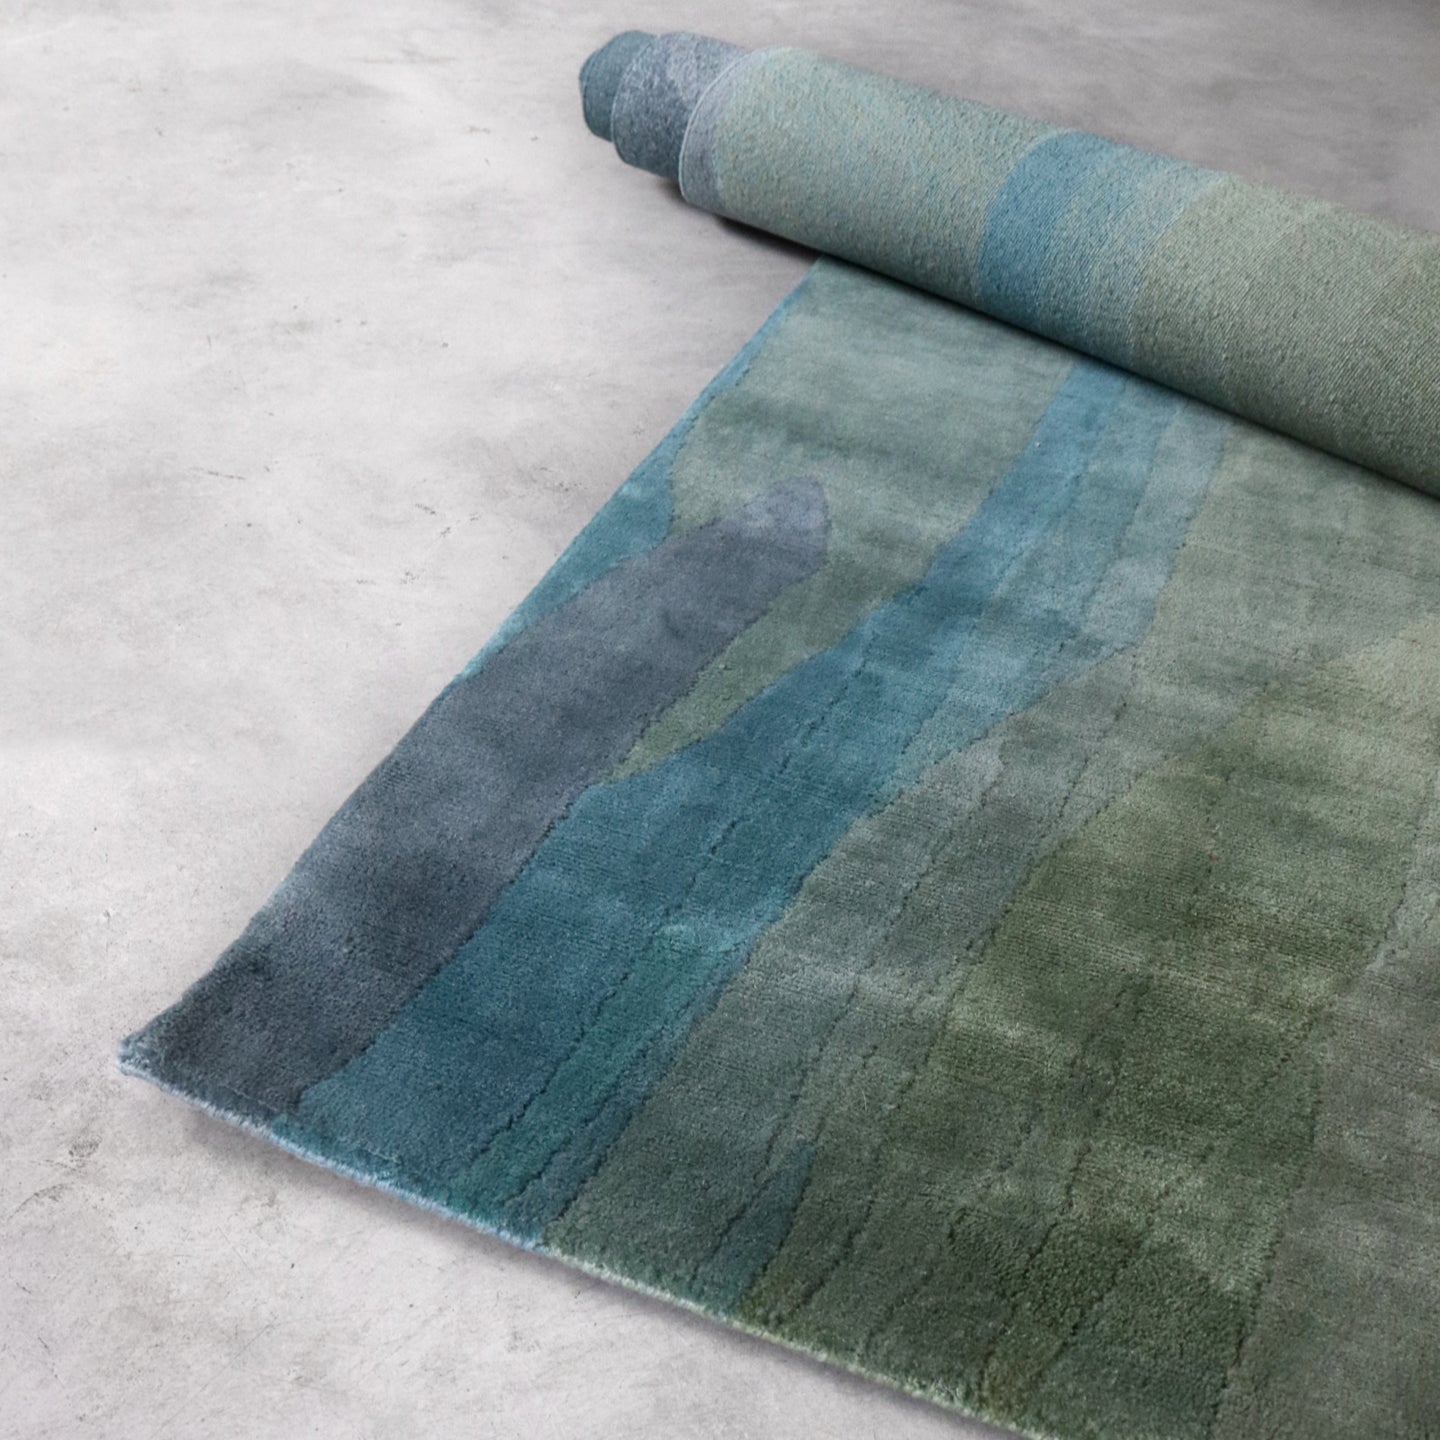 A blue and green rug on a floor